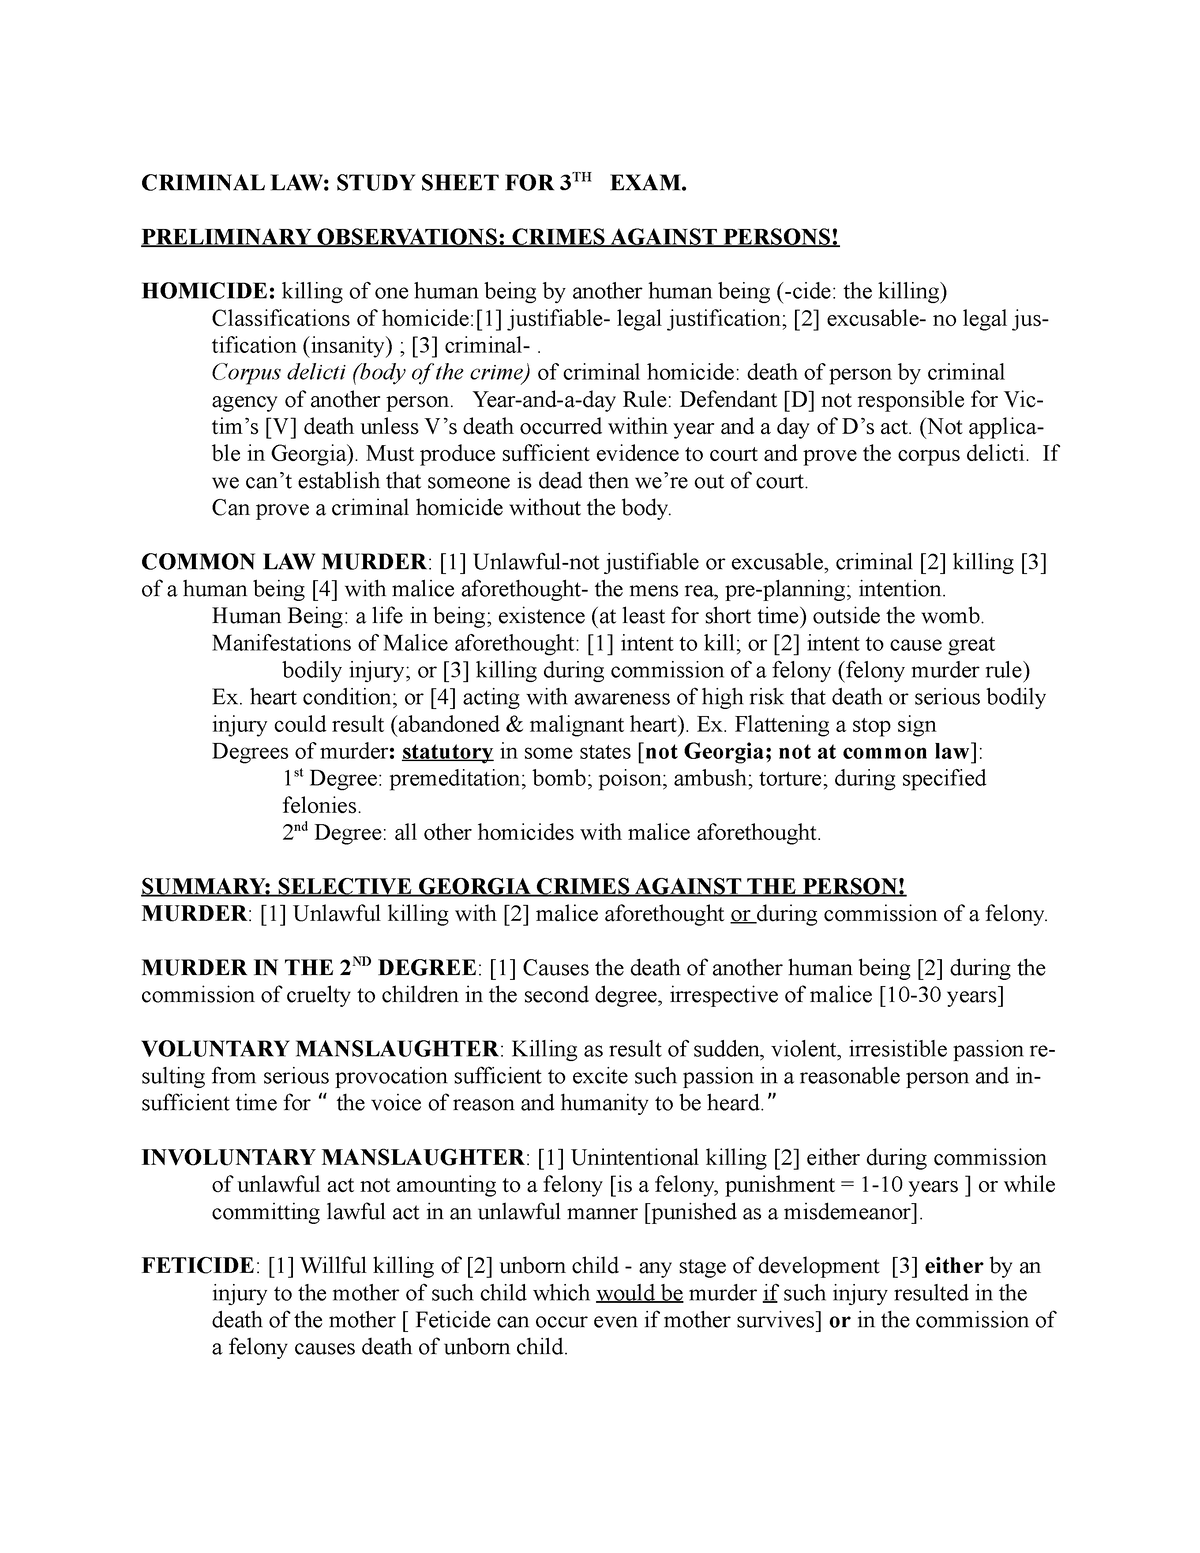 Criminal Law study sheet 3 CRIMINAL LAW: STUDY SHEET FOR 3TH EXAM